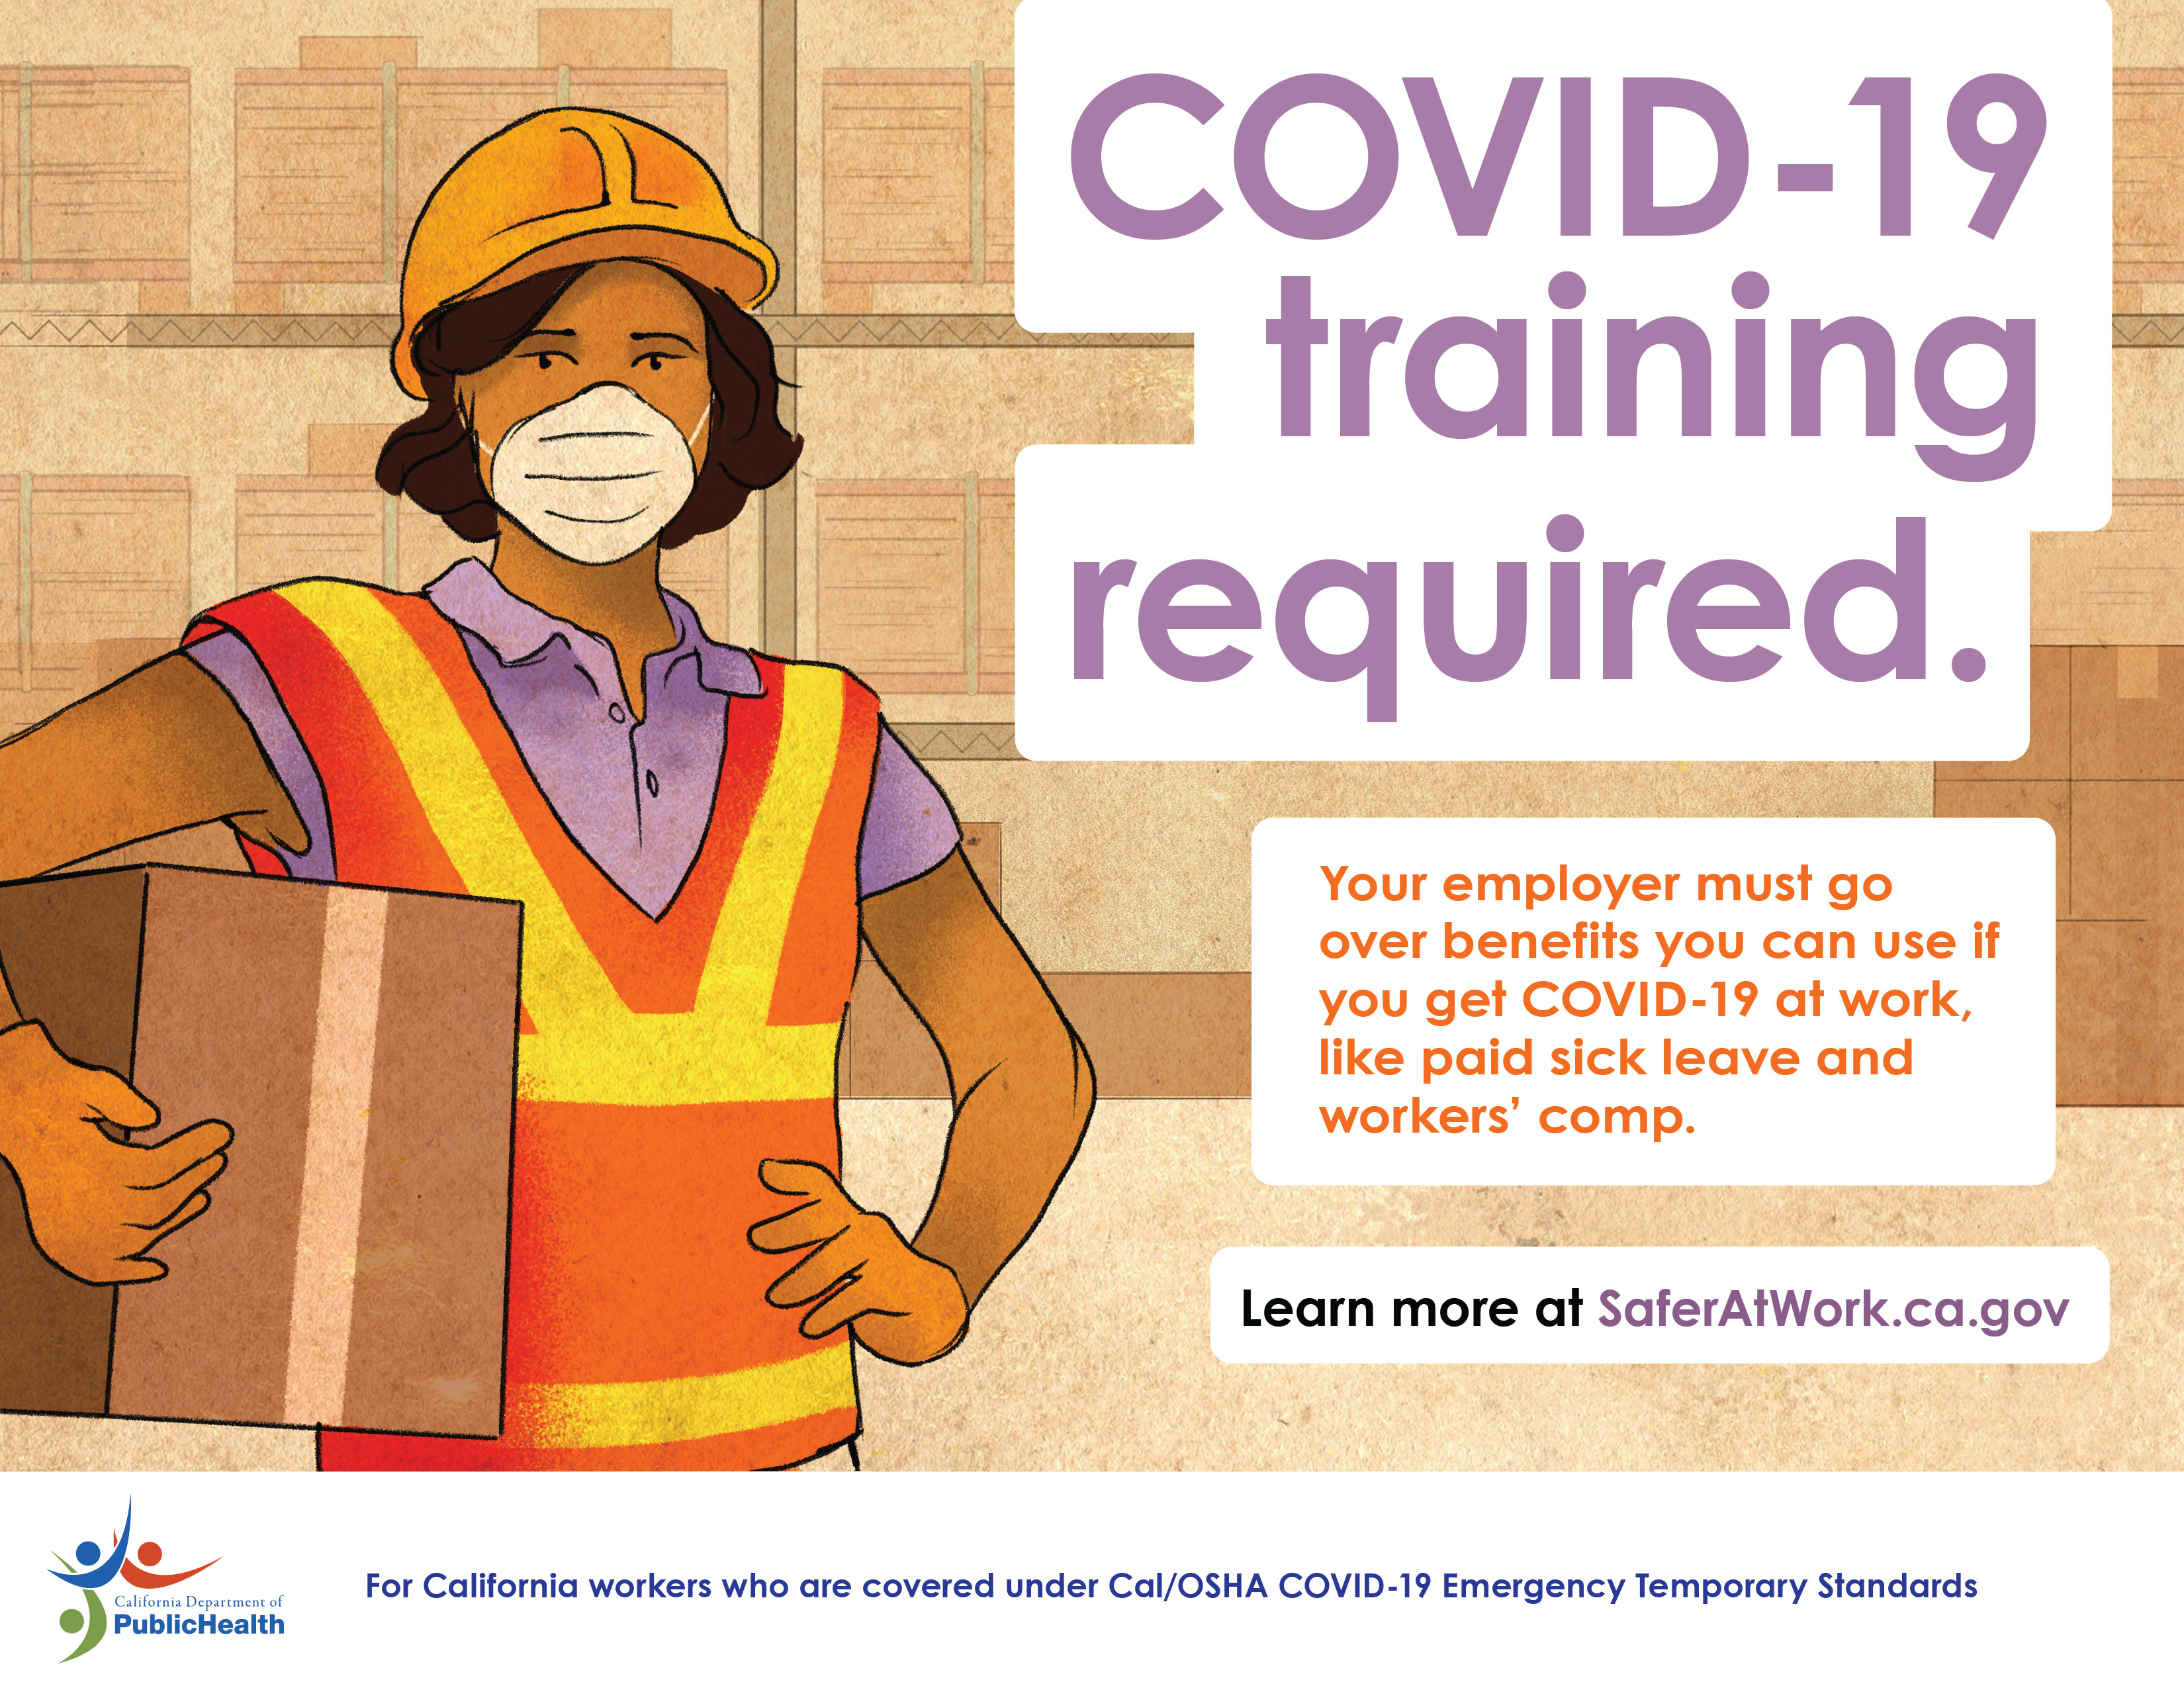 Warehouse worker at work. Text: COVID-19 training. Text: Your employer must go over benefits you can use if you get COVID-19 at work ...